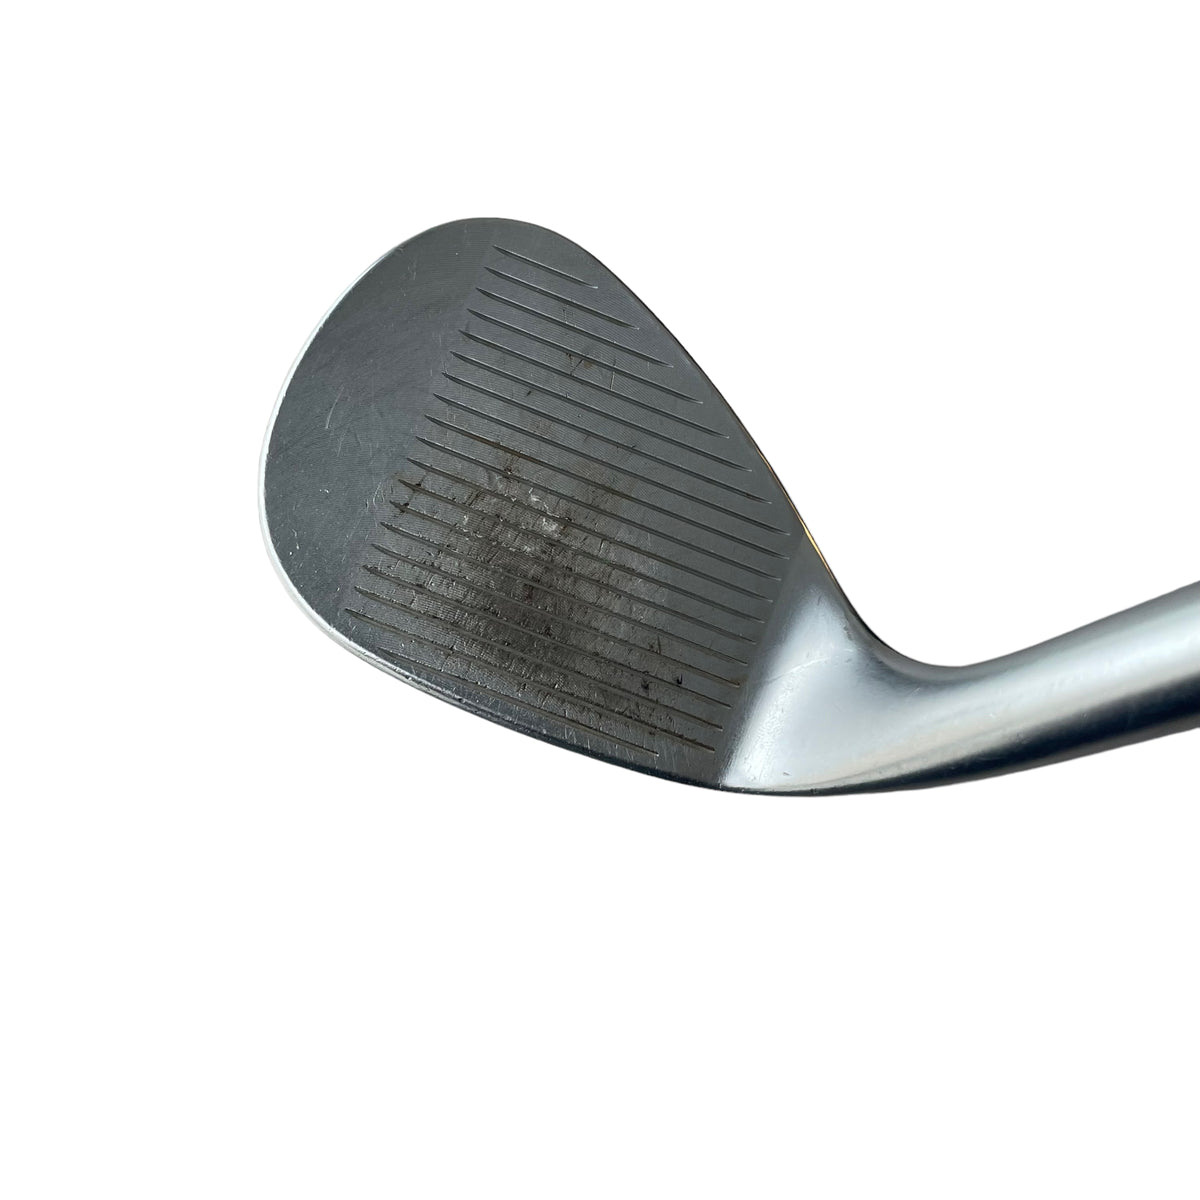 PING Glide Forged Pro Wedge - Used wedge Ping   